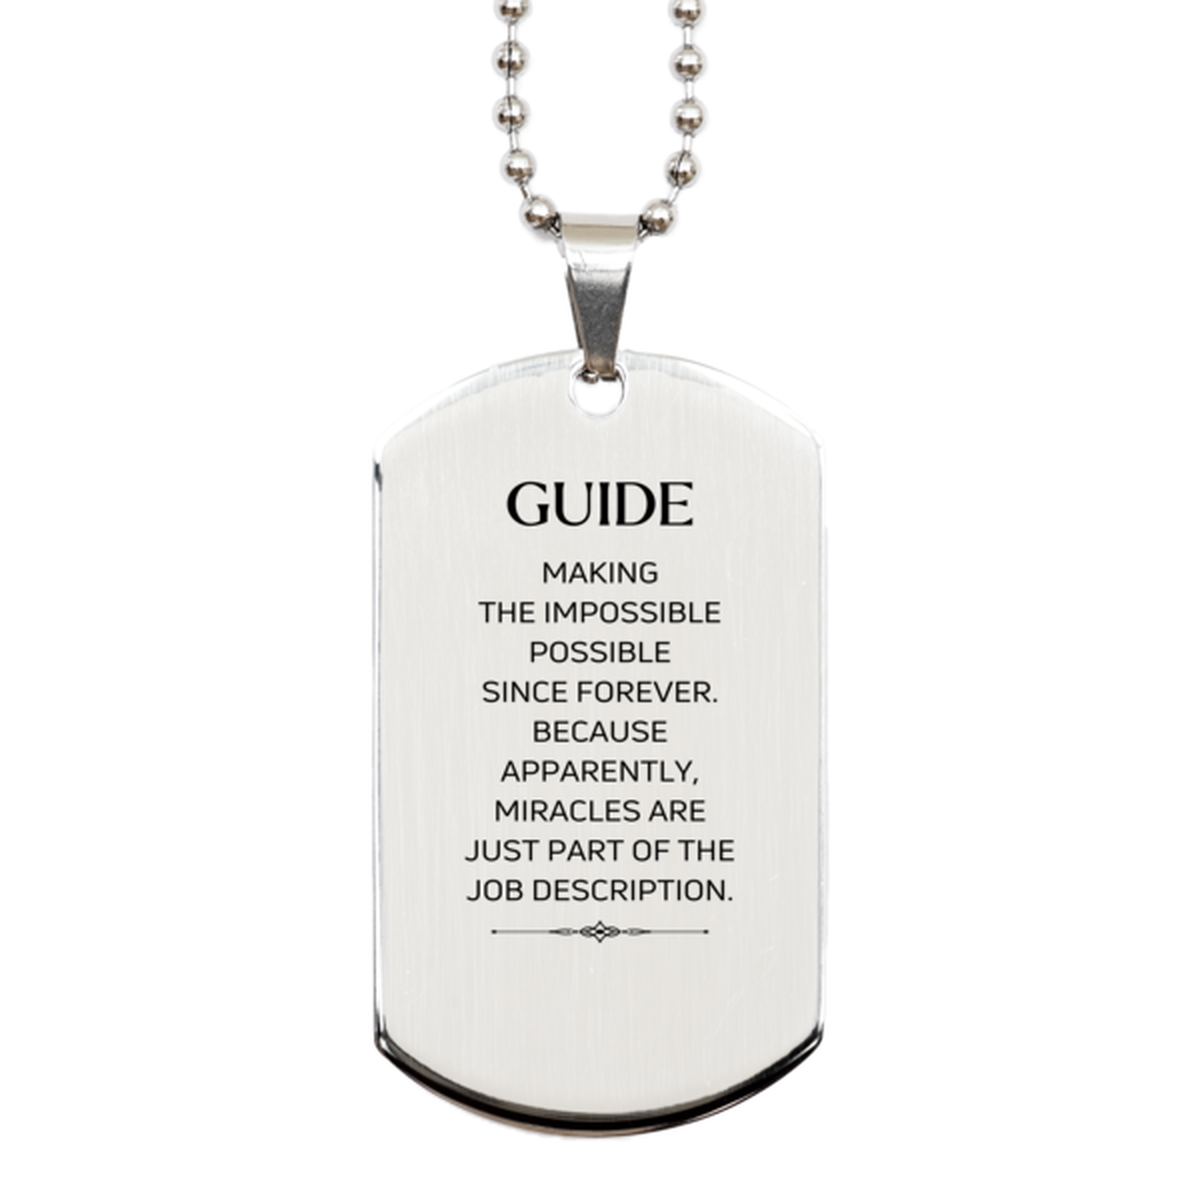 Funny Guide Gifts, Miracles are just part of the job description, Inspirational Birthday Silver Dog Tag For Guide, Men, Women, Coworkers, Friends, Boss